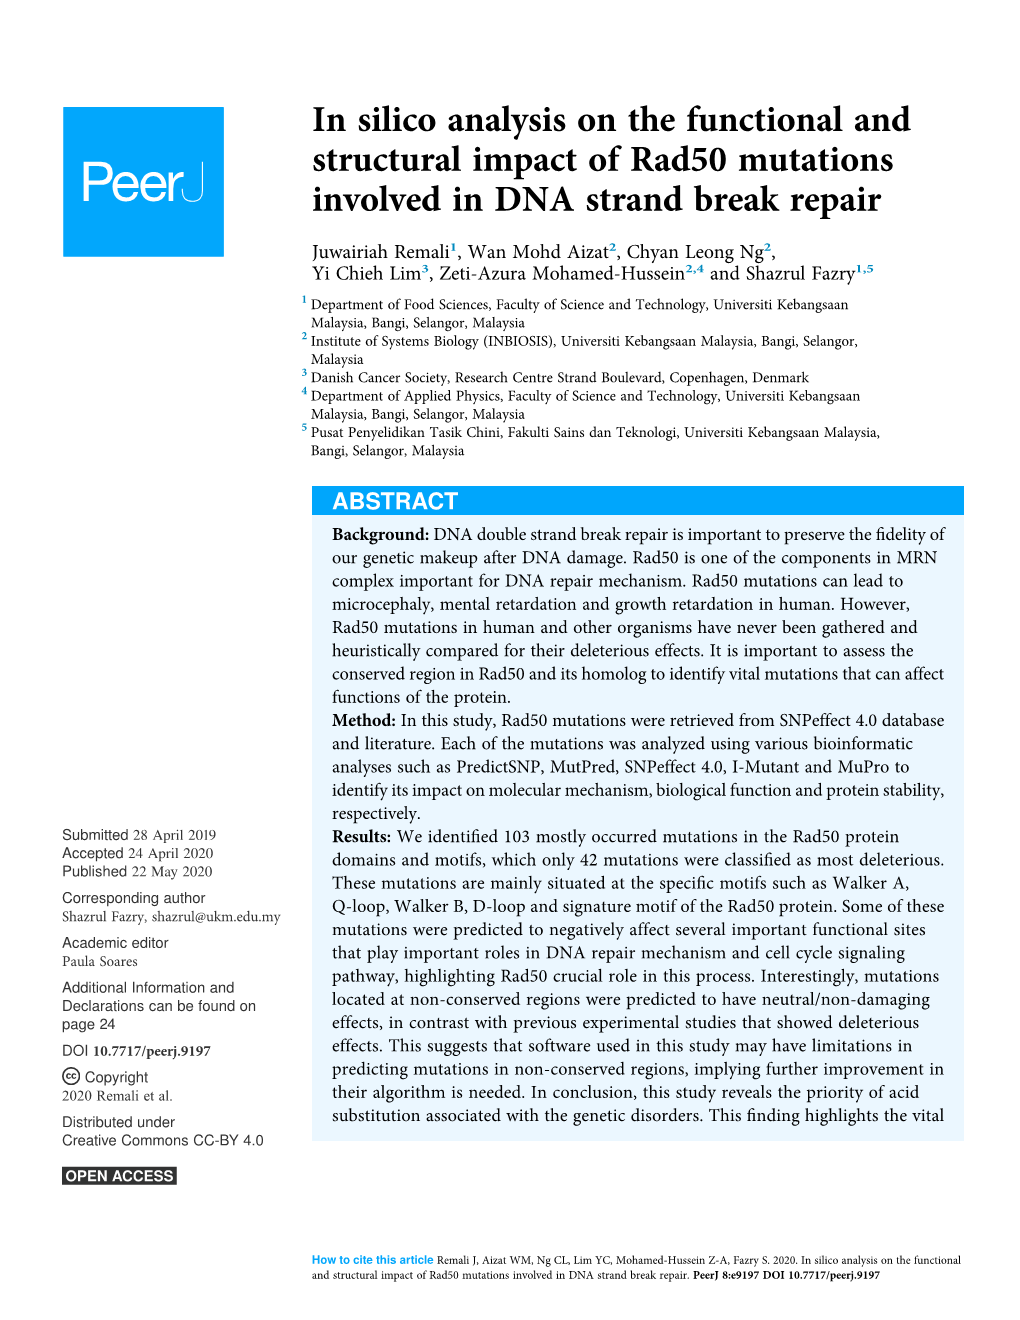 In Silico Analysis on the Functional and Structural Impact of Rad50 Mutations Involved in DNA Strand Break Repair